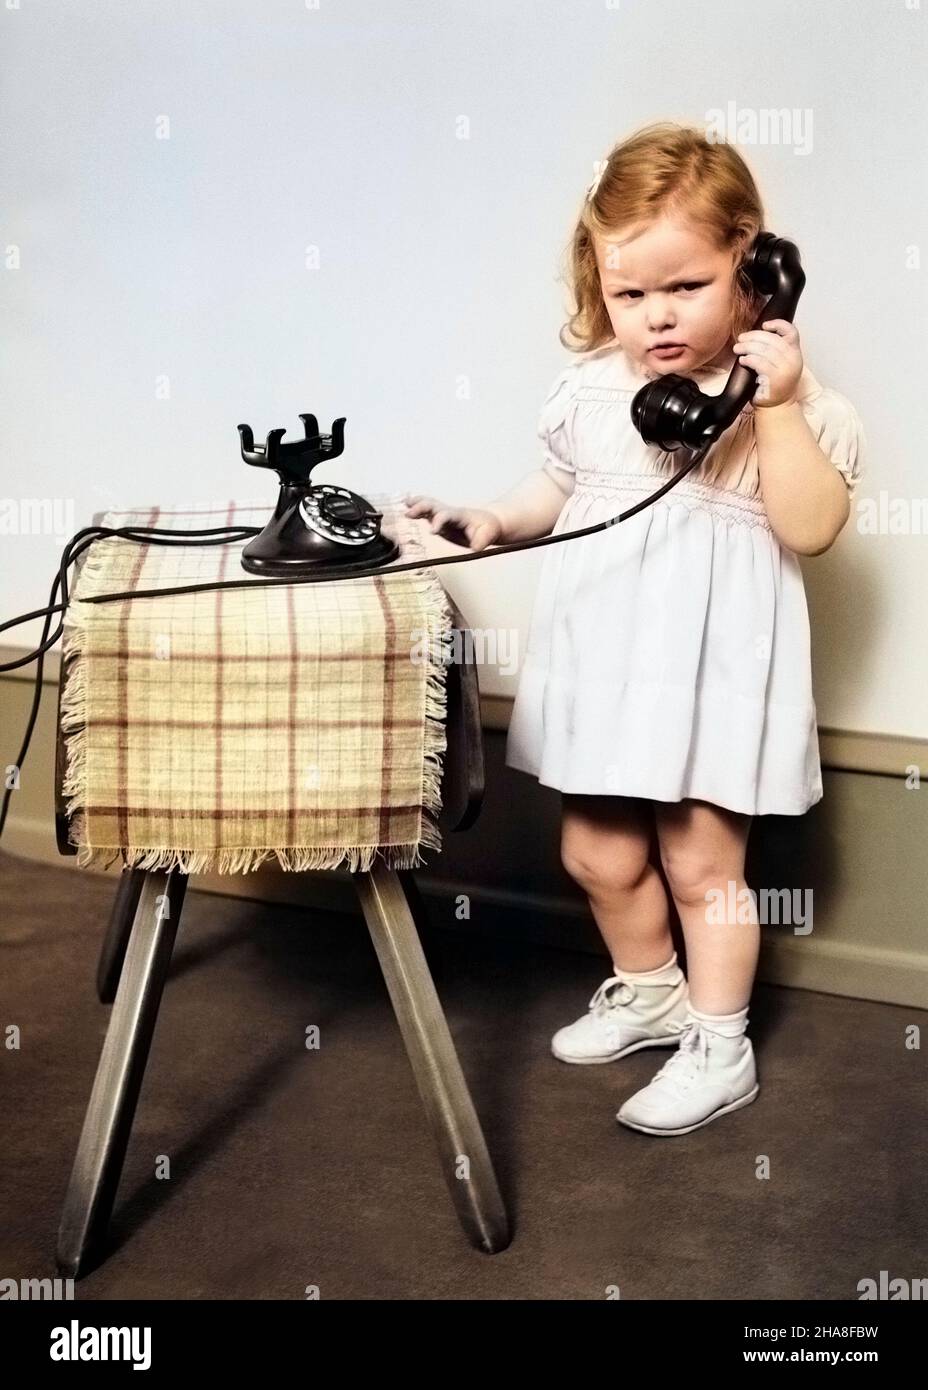 1930s 1940s UNHAPPY FROWNING LITTLE GIRL TALKING ON OLD BLACK ROTARY DIAL TELEPHONE - t5516c HAR001 HARS CAUCASIAN ETHNICITY HAR001 OLD FASHIONED Stock Photo